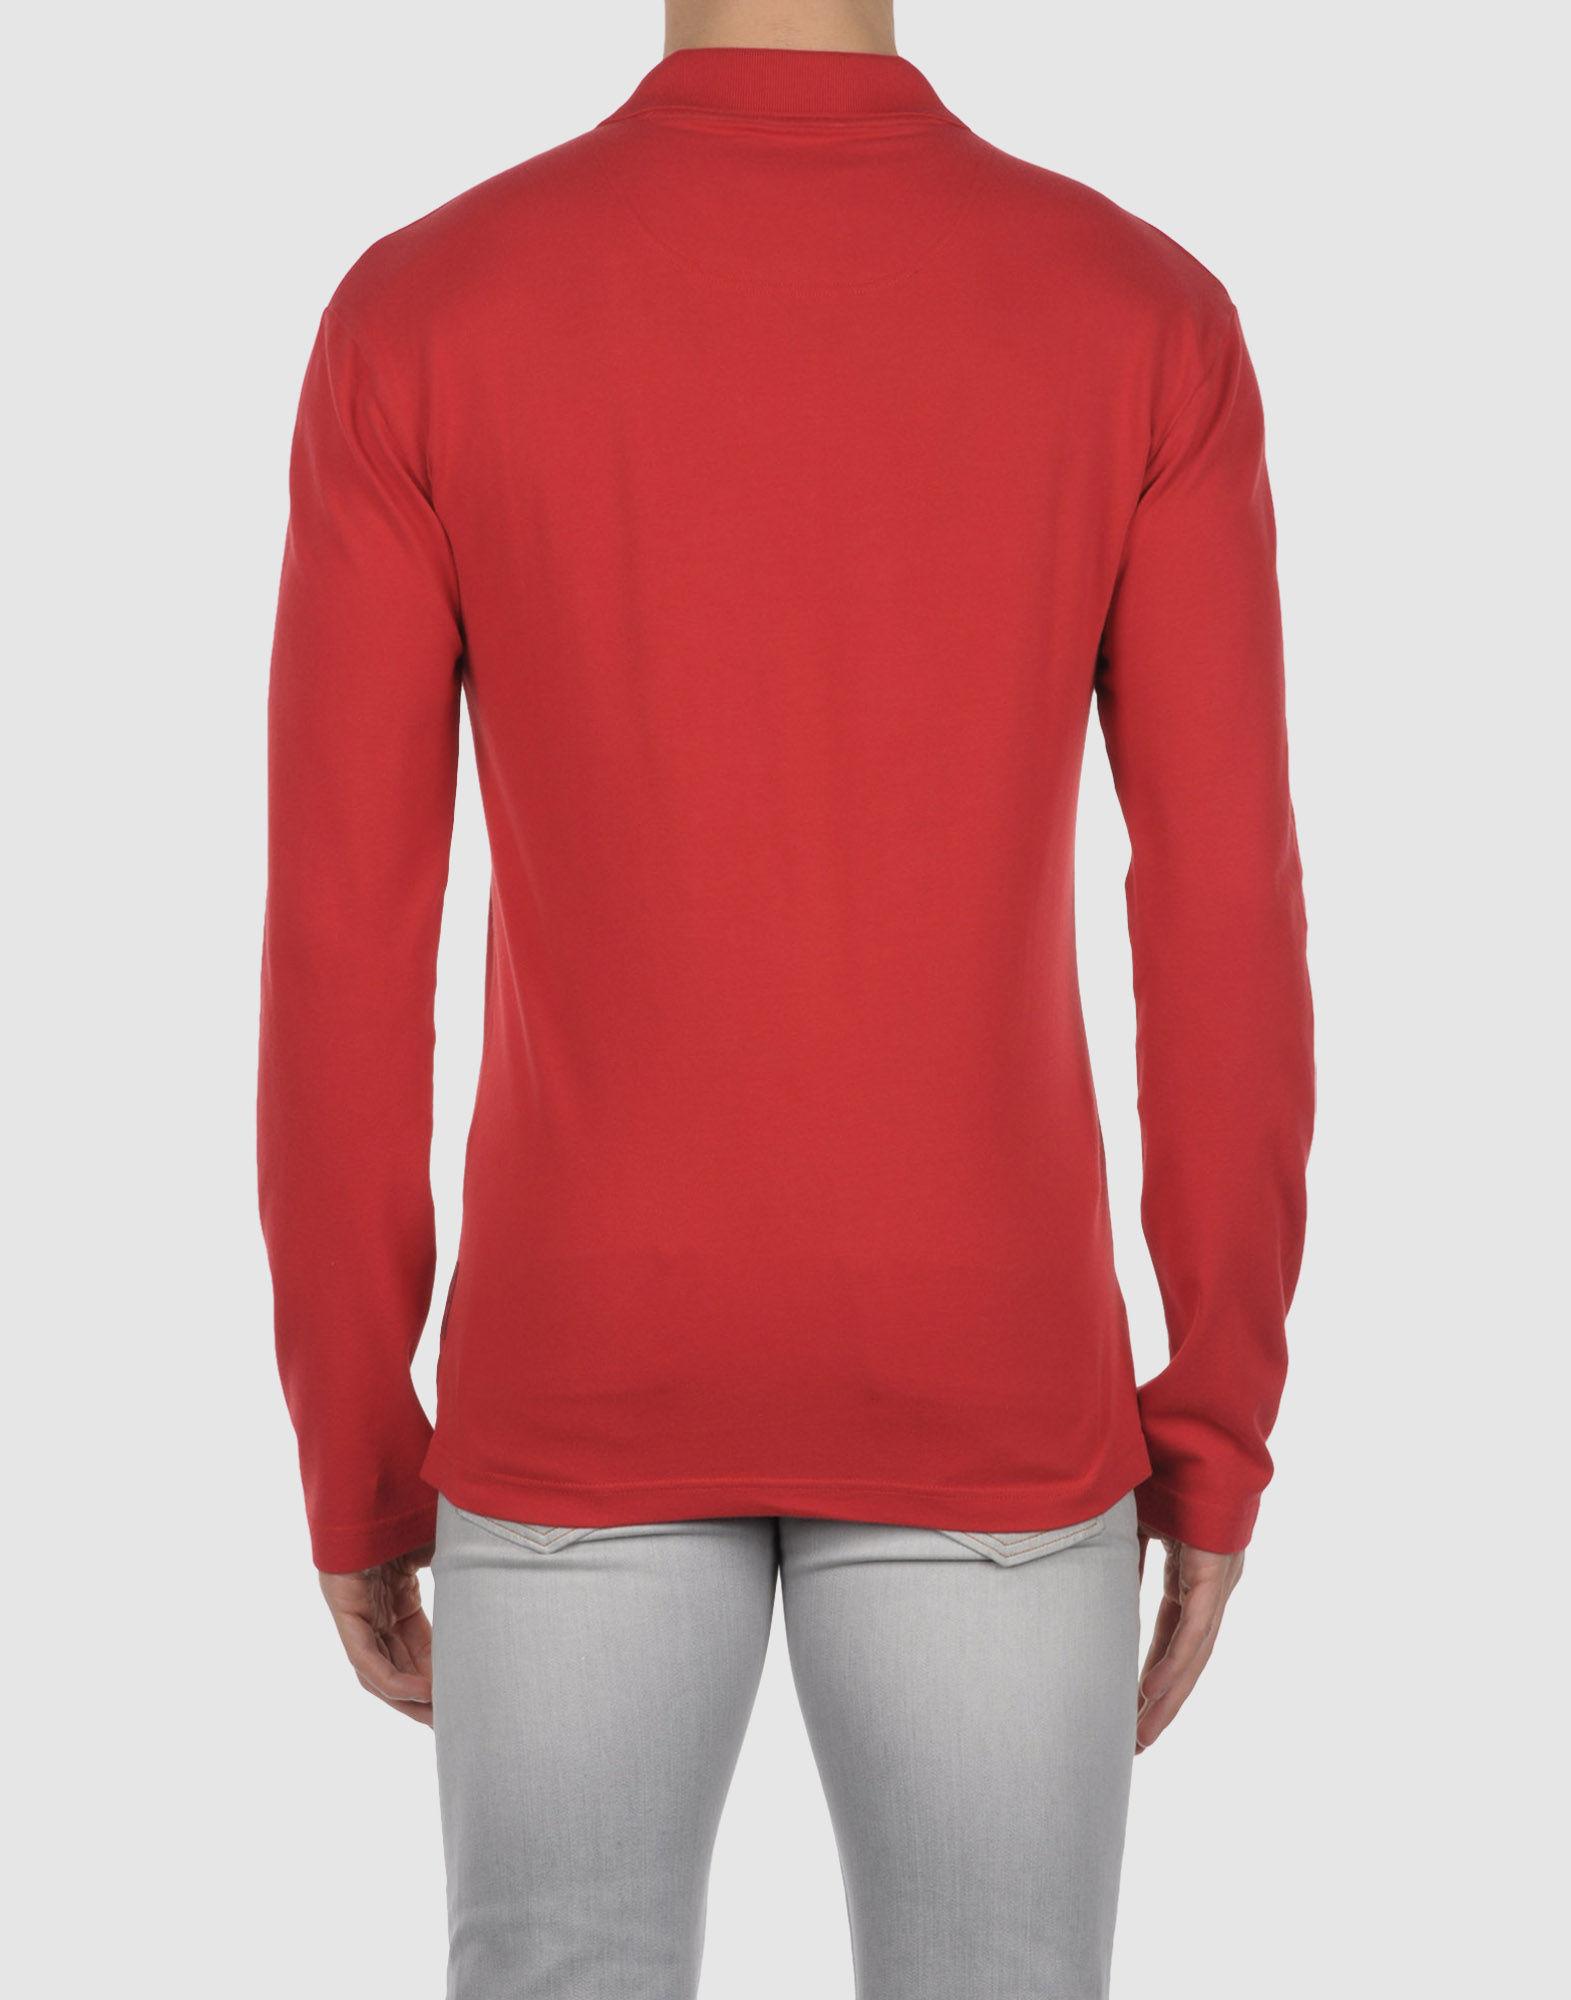 Armani Jeans Polo Shirt in Red for Lyst